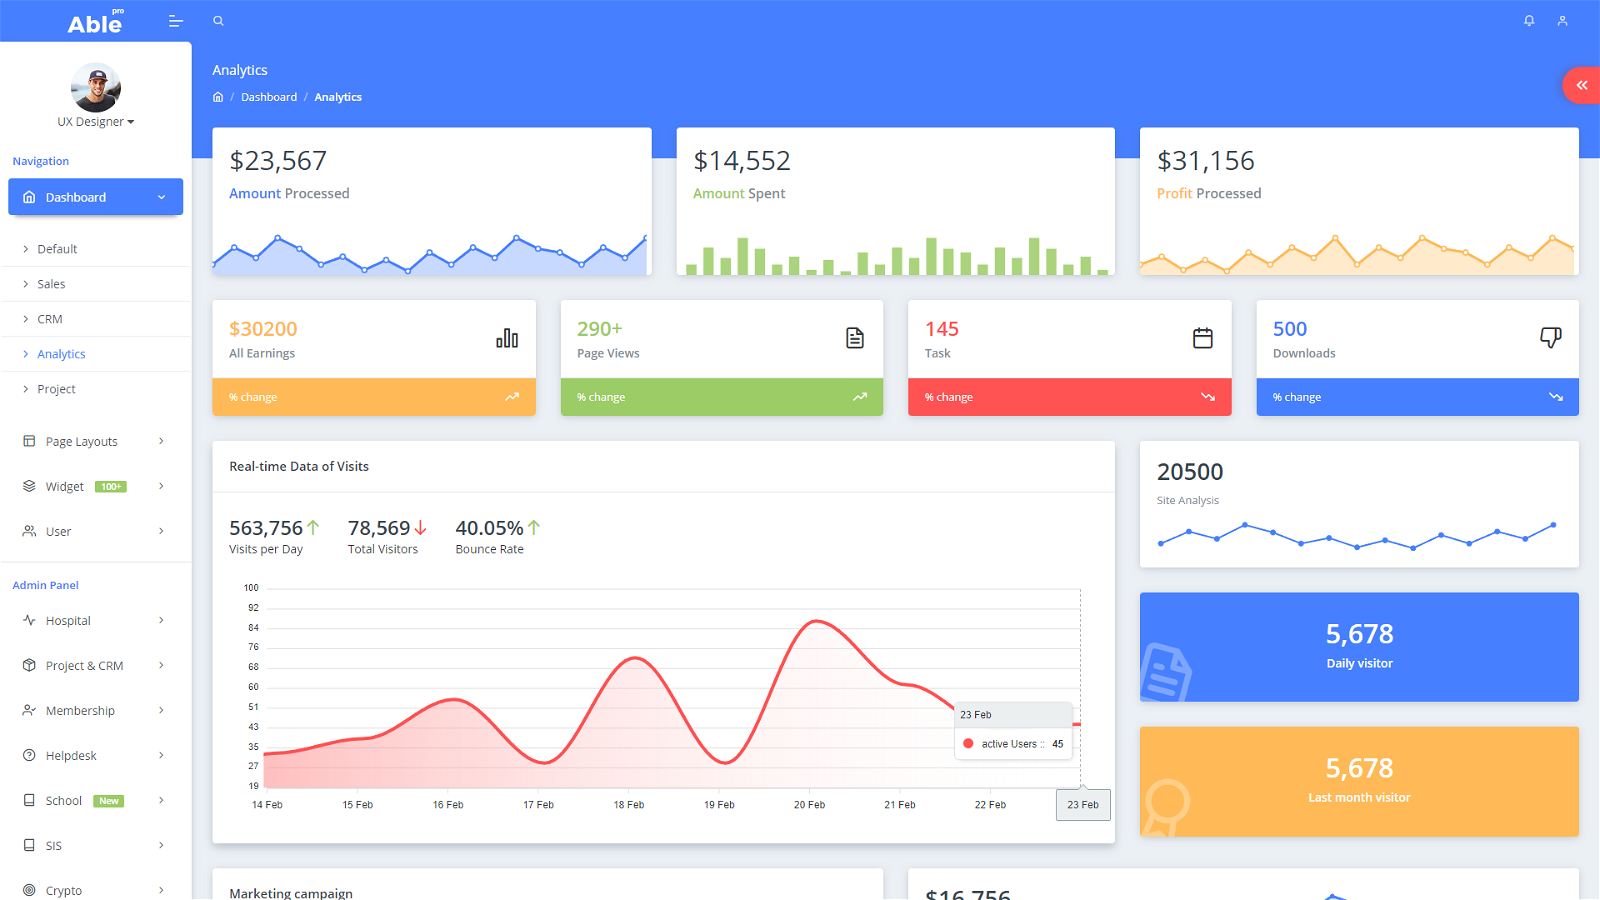 Able Pro Bootstrap 5 KPI Dashboard Example